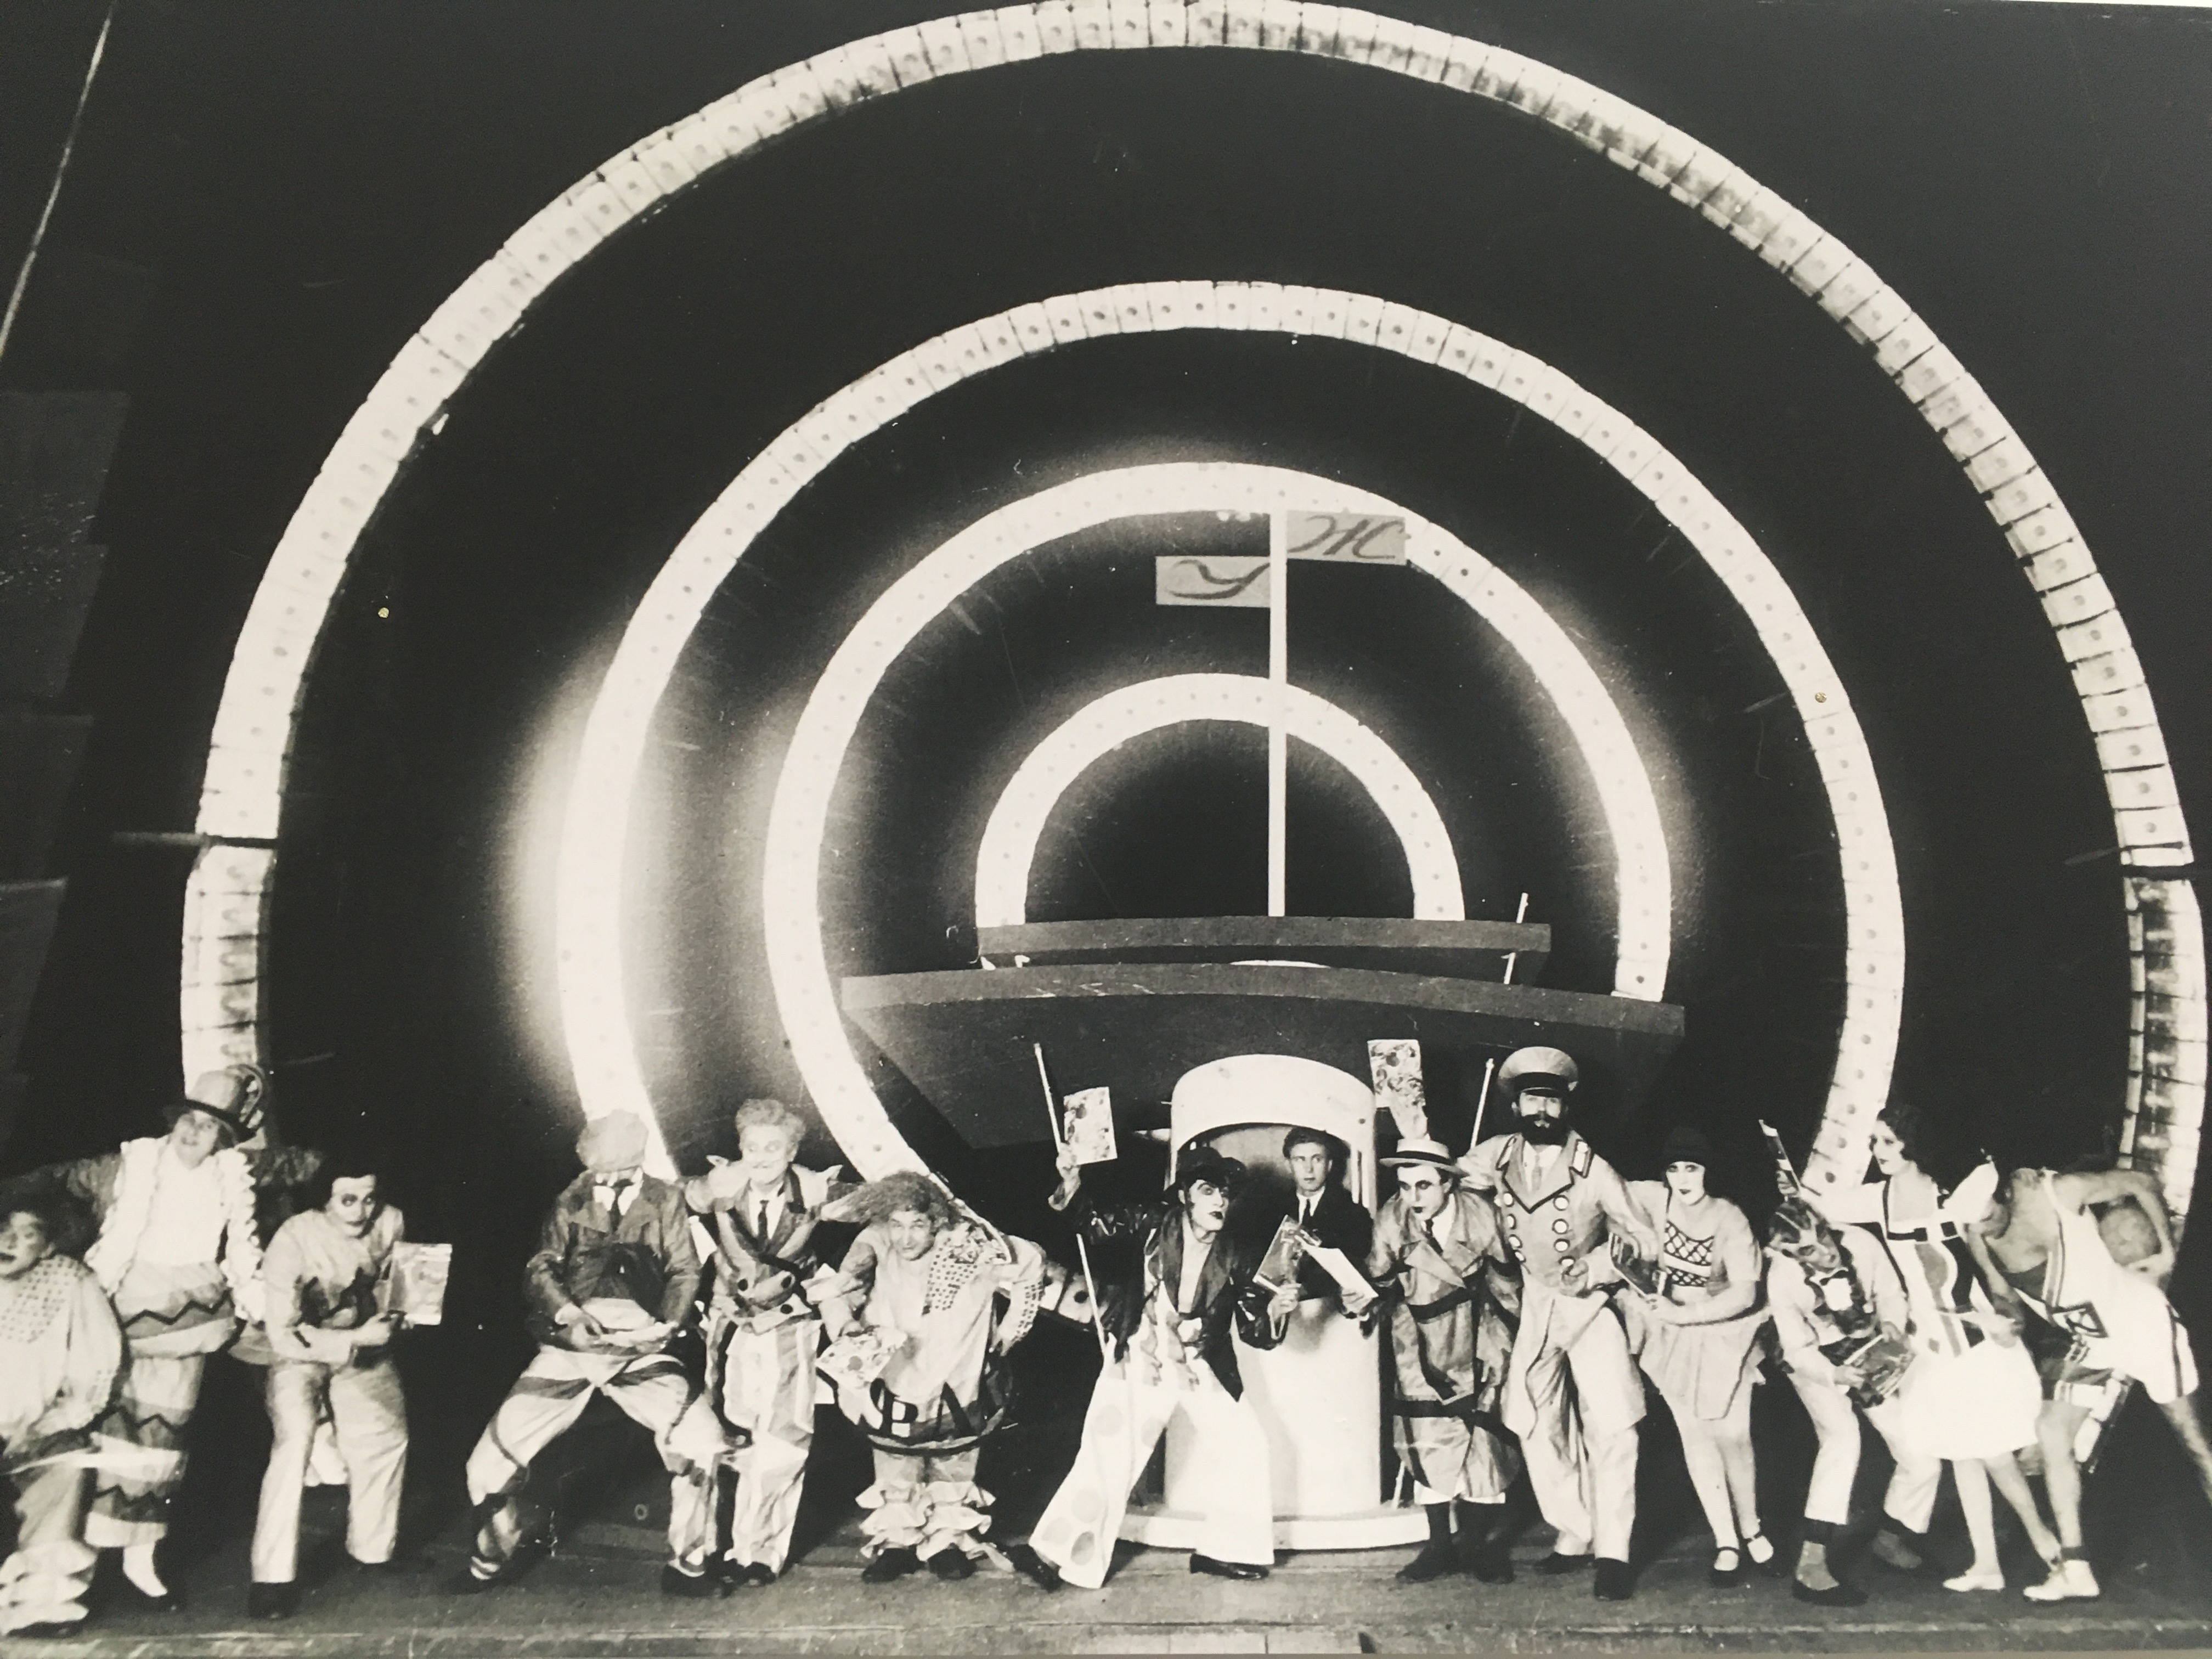 Photo from the play "Hello from Radio 477." The Berezil troupe performed this in Kharkiv in 1929. Taken by author at exhibit “Kurbas: New Worlds” curated by Virlana Tkacz, Tetiana Rudenko, and Waldemart Klyuzko at Art Arsenal, 2018.